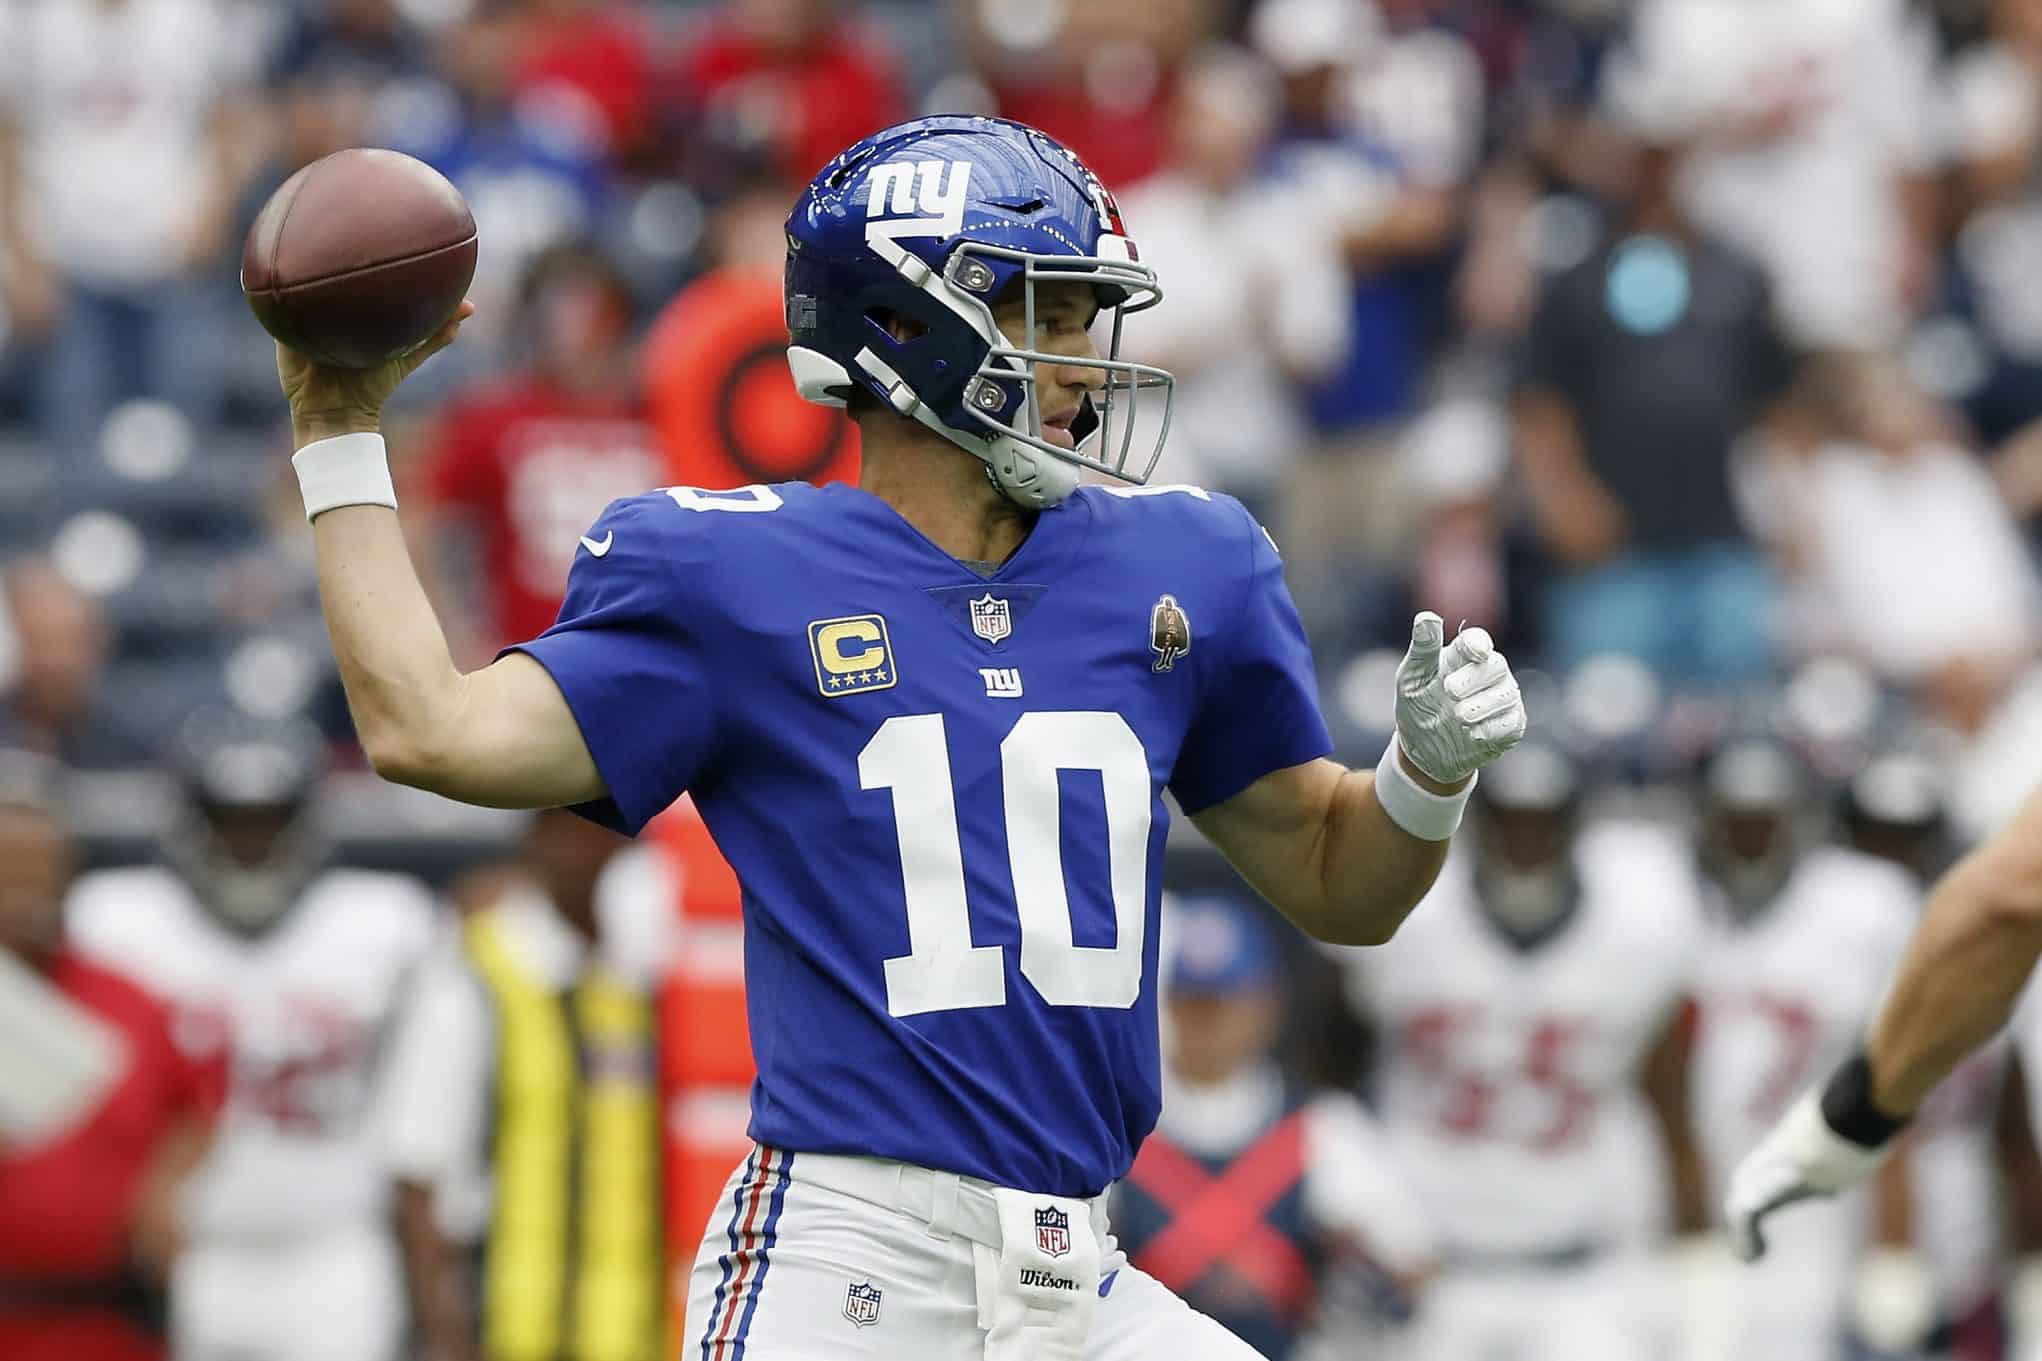 Giants win first game of the season behind Eli Manning